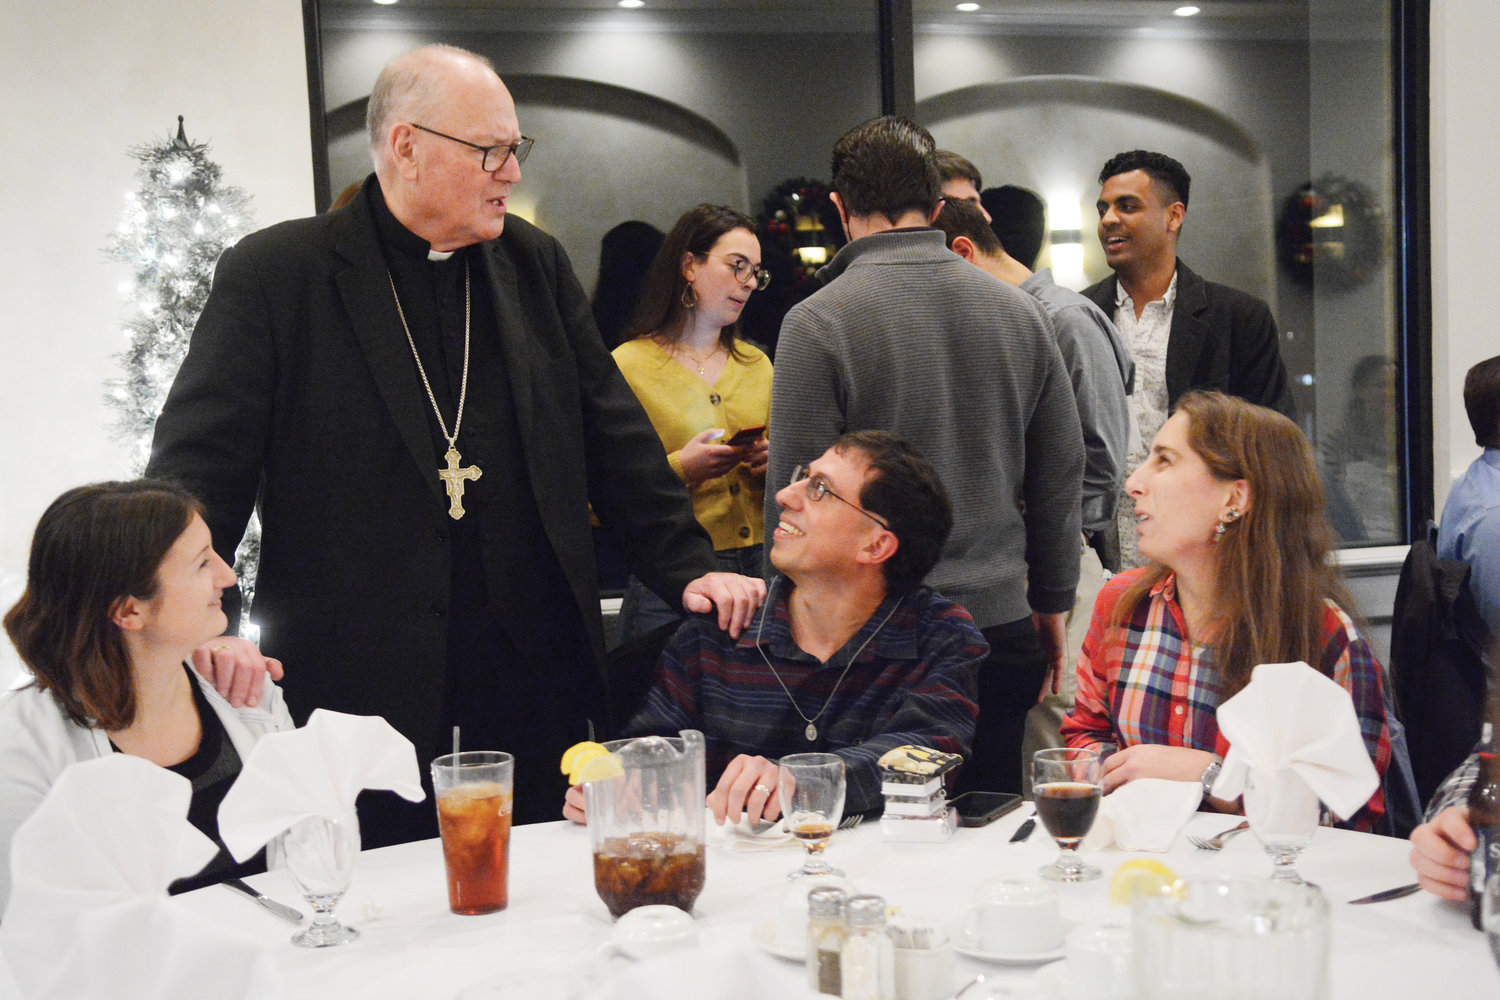 Cardinal Dolan speaks with Amanda Hallworth, and married couple Edward and Claire Abdallah, during Theology on Tap evening for Catholic young adults Dec. 16 at Four Brothers Restaurant in Mahopac.